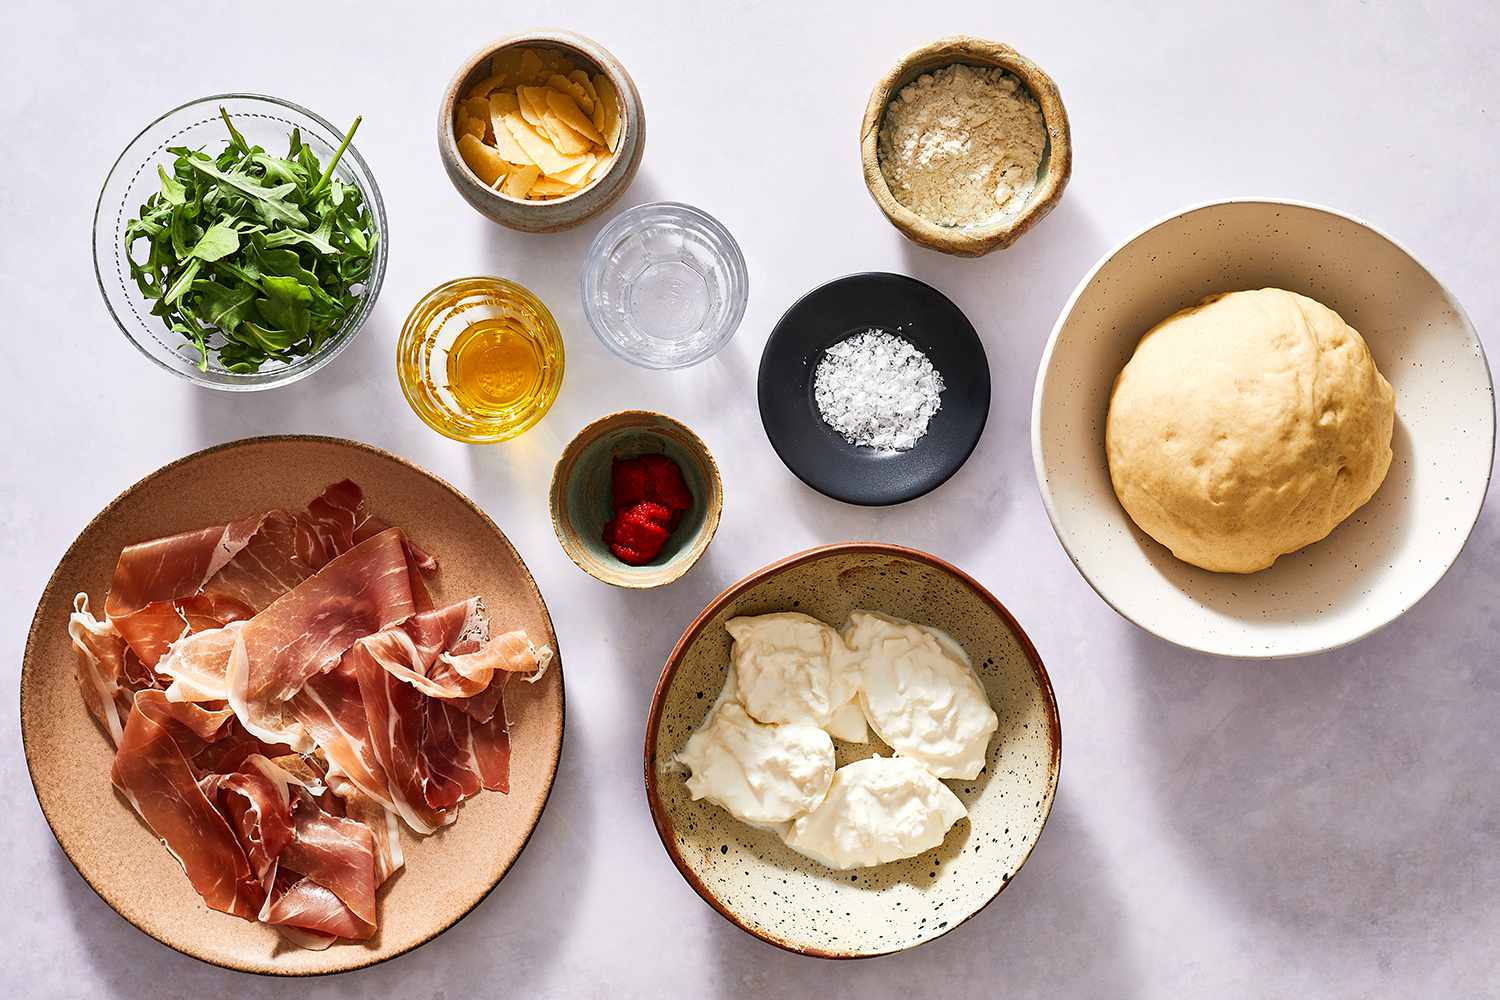 Ingredients gathered for prosciutto pizza